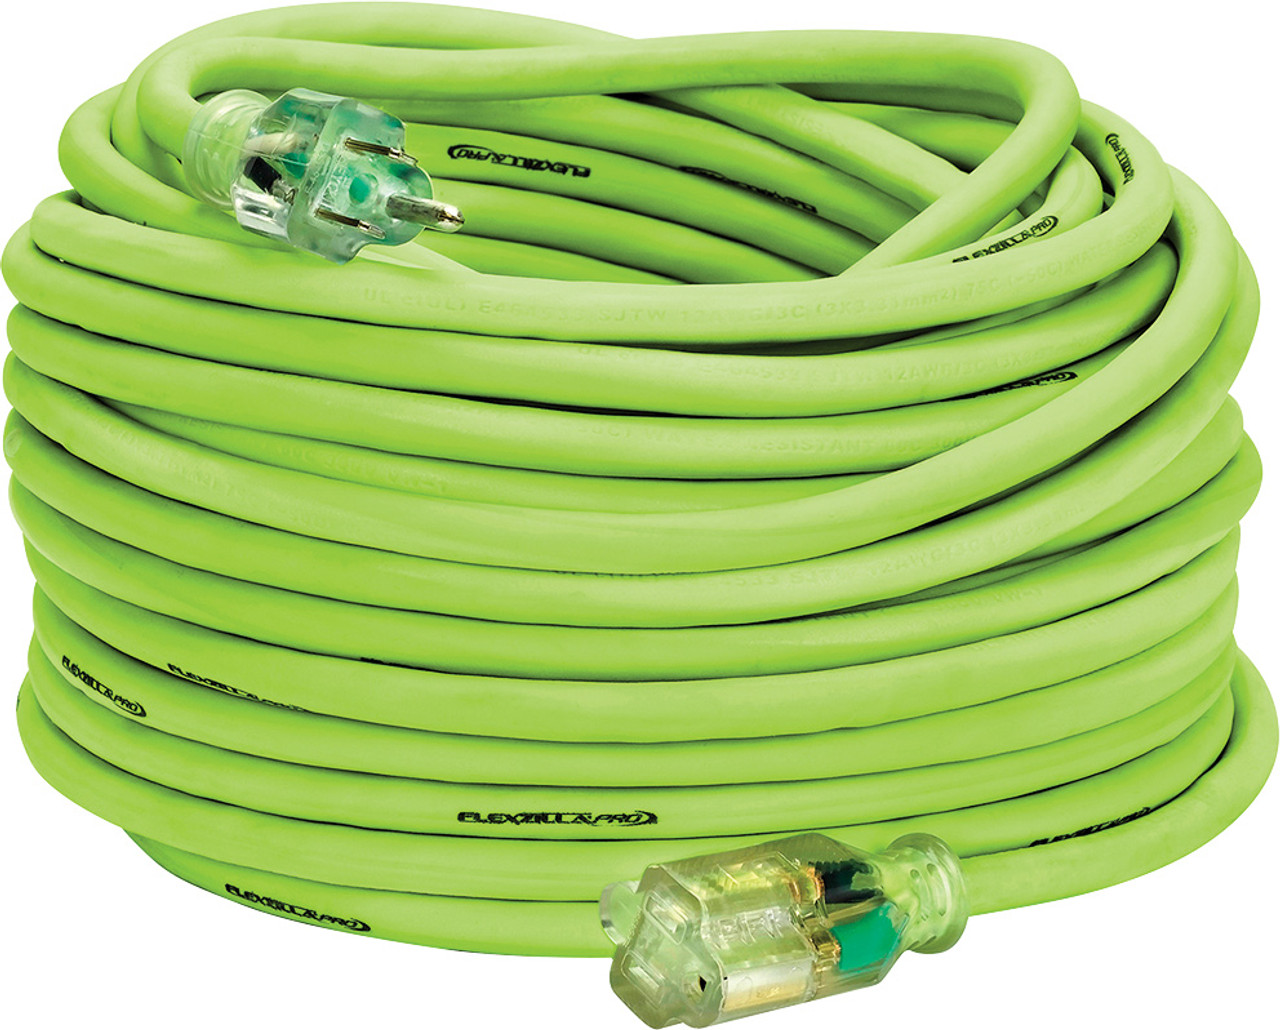 PG289 - 100 FT. FLEXZILLA PRO EXTENSION CORD, 12/3 SJTW, LIGHTED